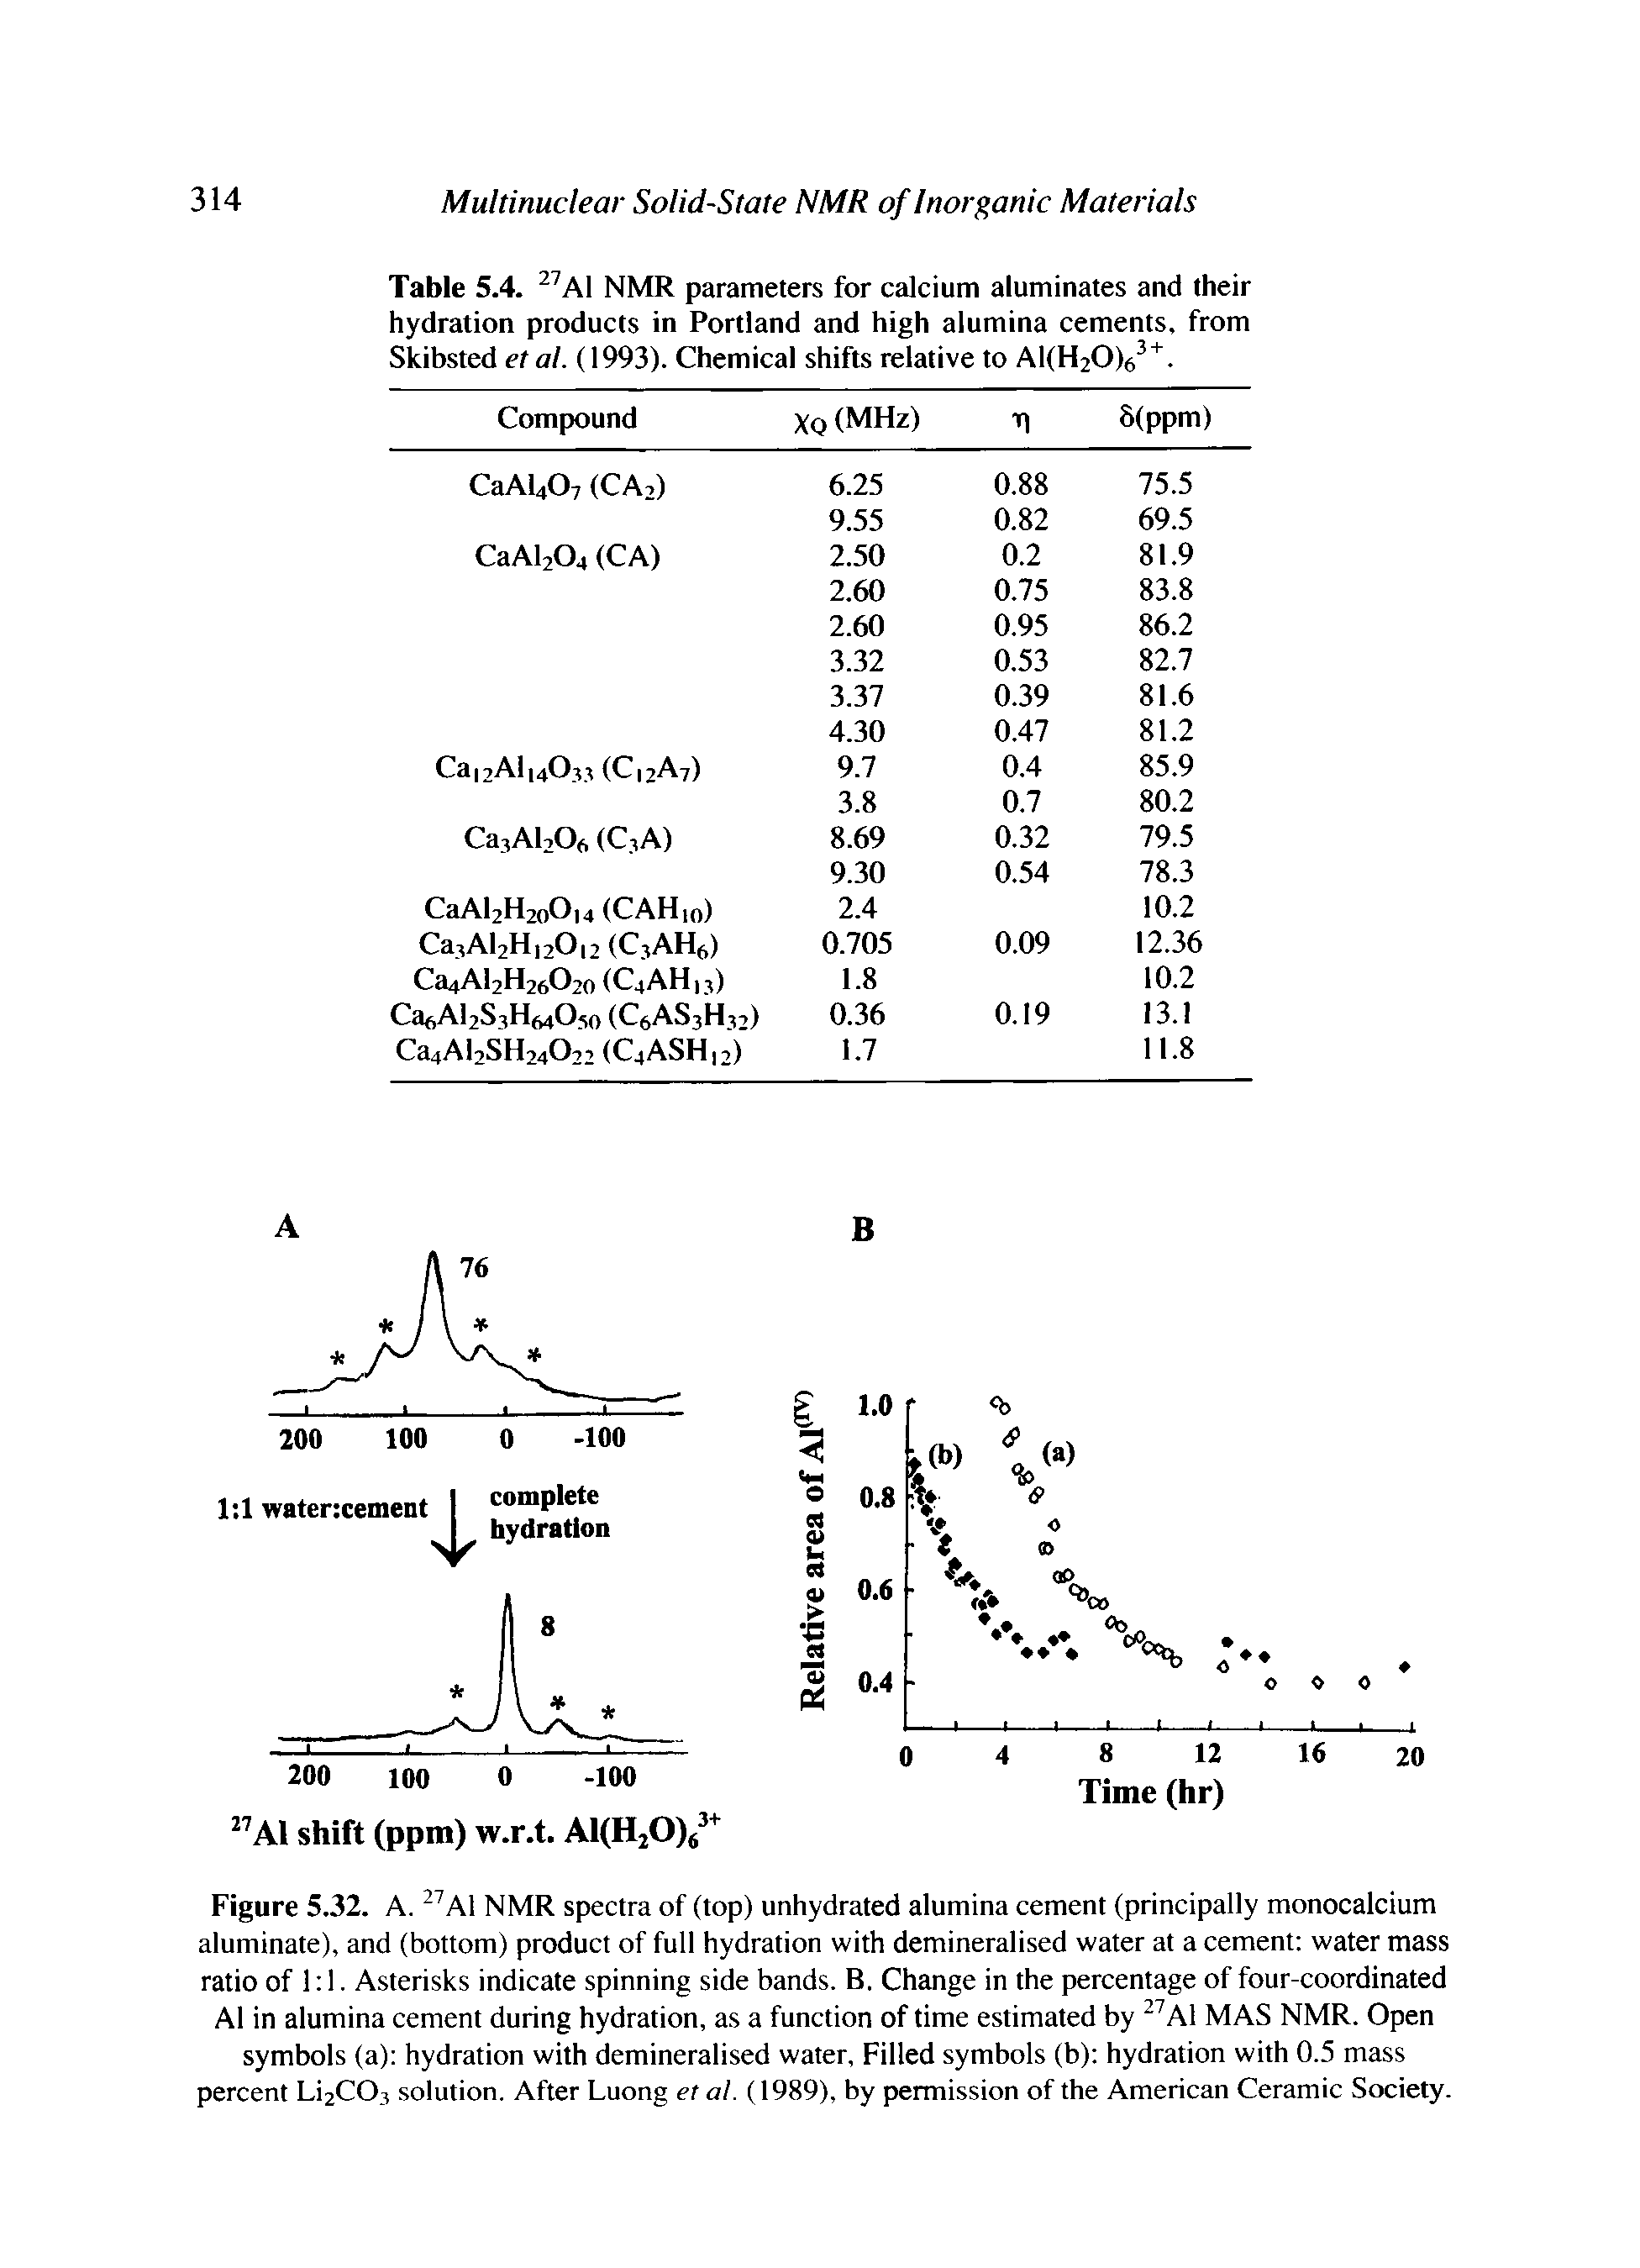 Figure 5.32. A. Al NMR spectra of (top) unhydrated alumina cement (principally monocalcium aluminate), and (bottom) product of full hydration with demineralised water at a cement water mass ratio of 1 1. Asterisks indicate spinning side bands. B. Change in the percentage of four-coordinated Al in alumina cement during hydration, as a function of time estimated by Al MAS NMR. Open symbols (a) hydration with demineralised water. Filled symbols (b) hydration with 0.5 mass percent Li2C03 solution. After Luong et al. (1989), by permission of the American Ceramic Society.